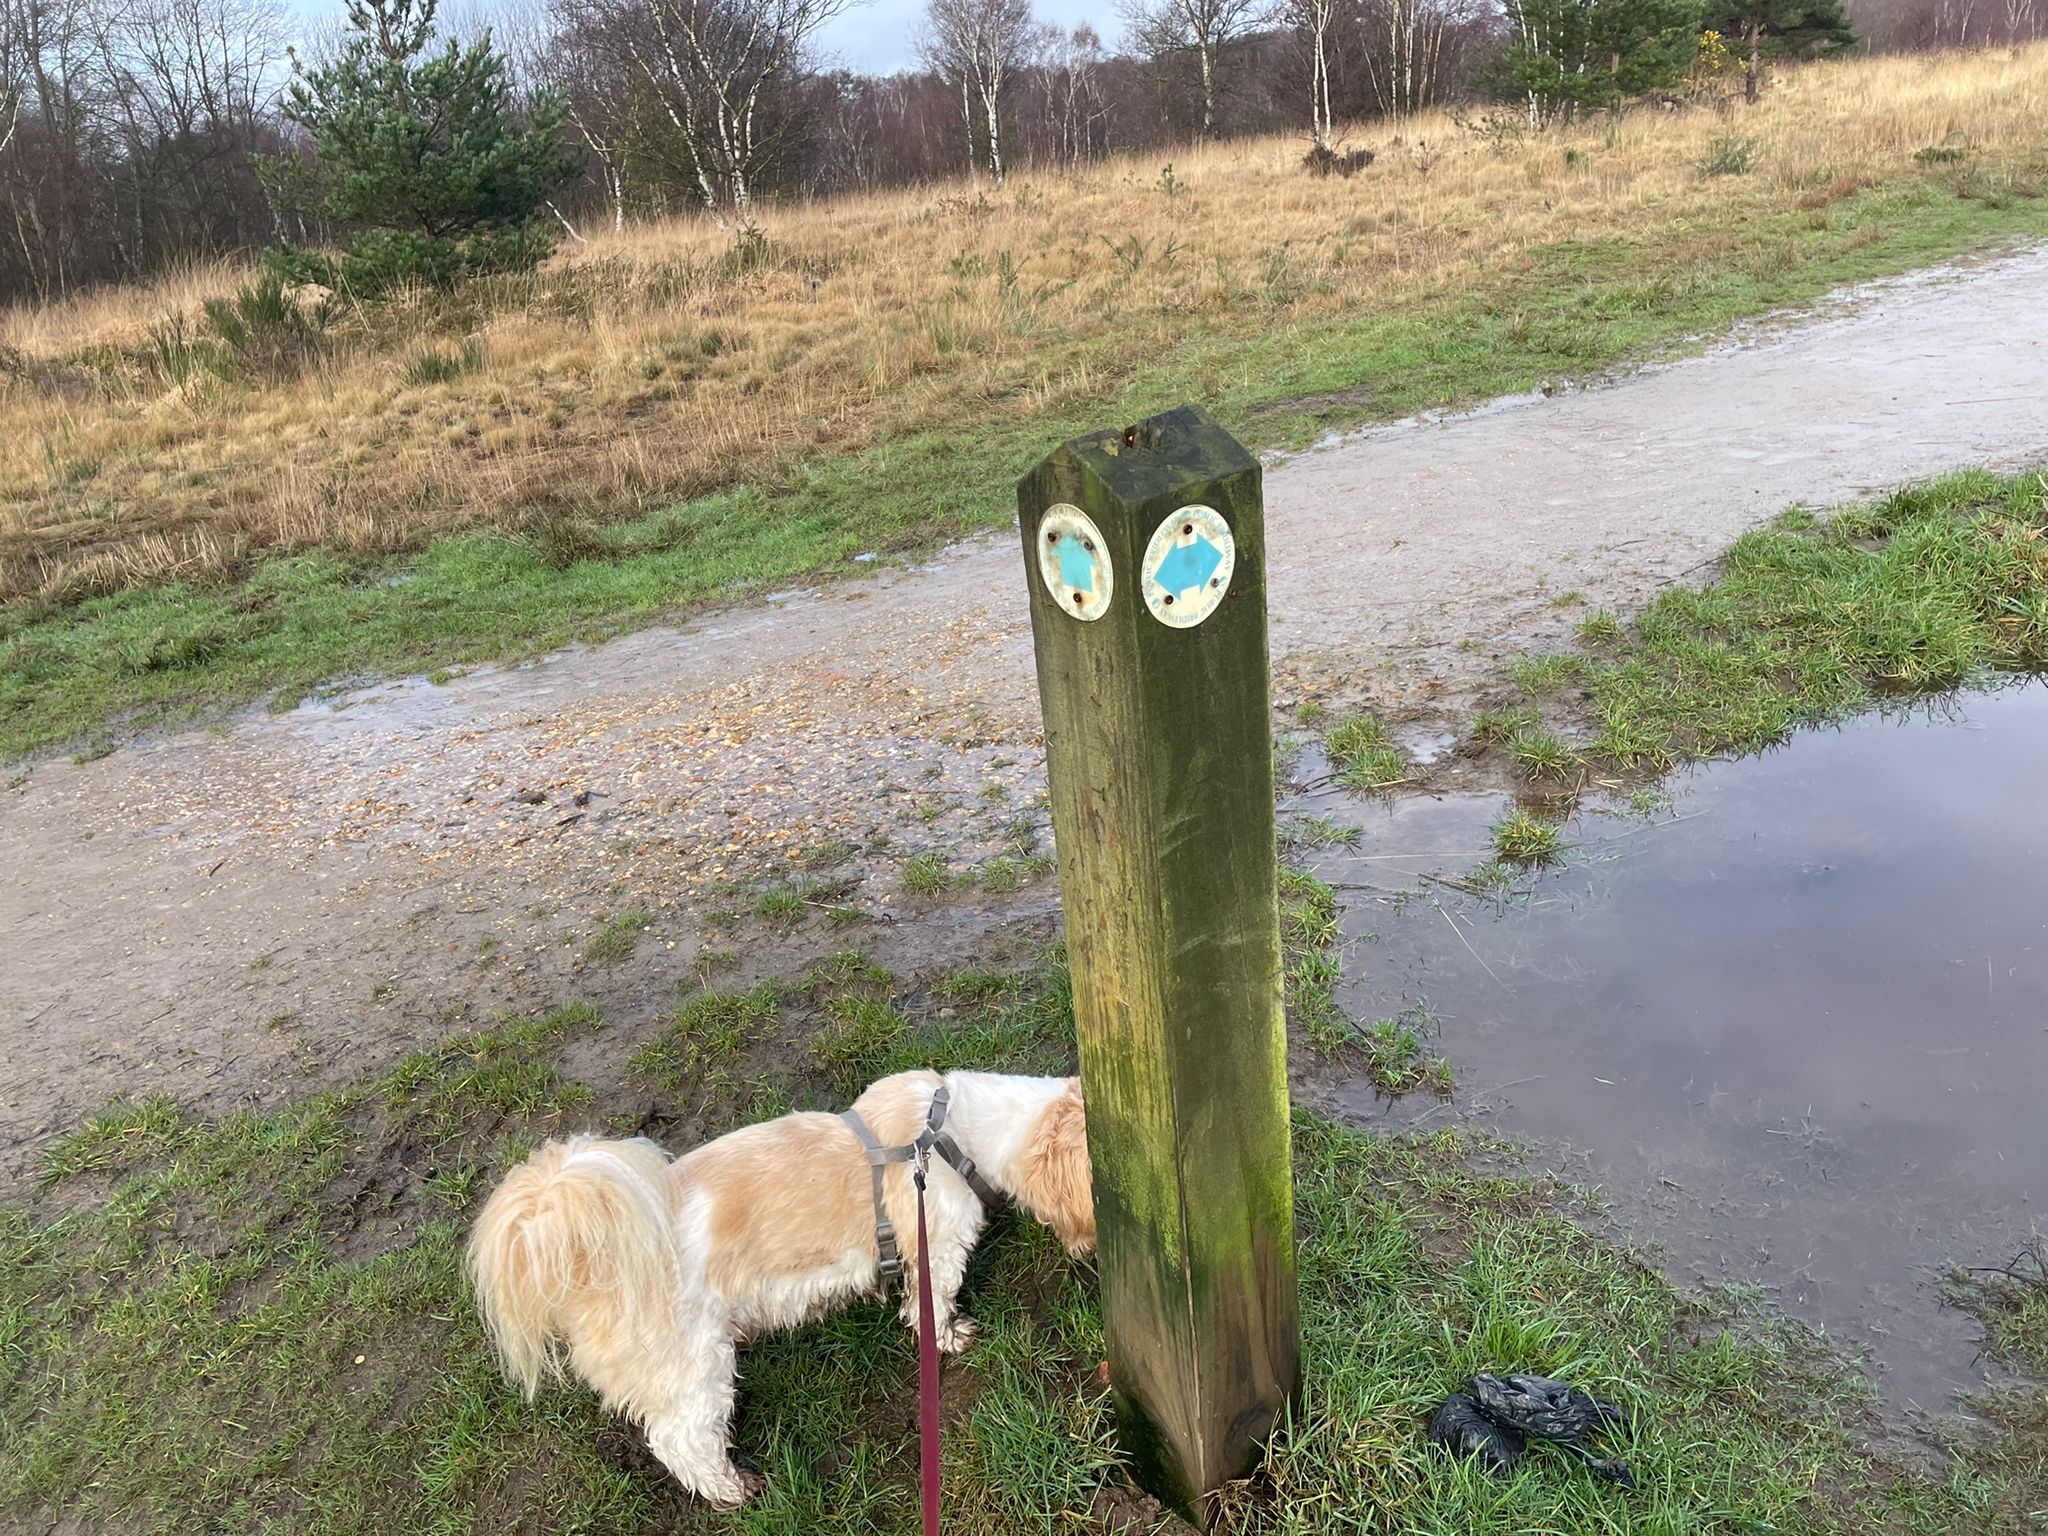 A small beige and white dog sniffing a wooden post with a blue arrow sign marking a bridleway